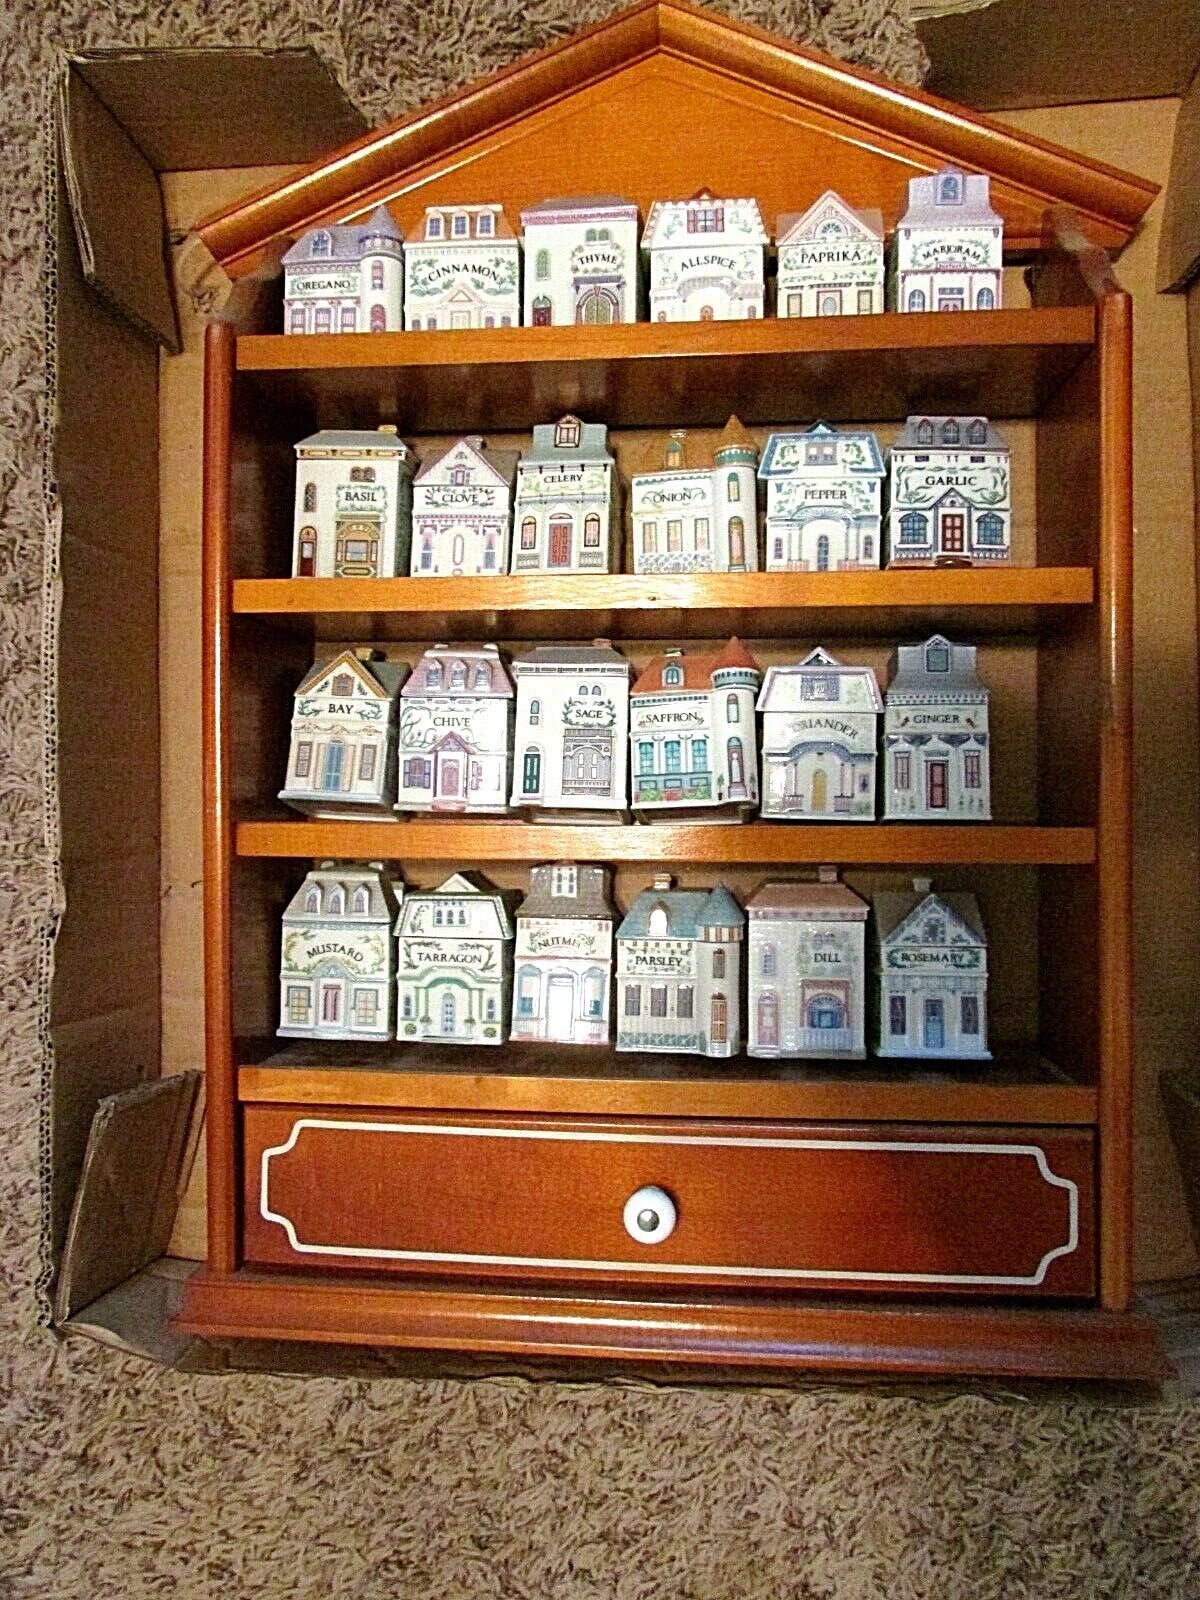 Lenox Spice Village with 24 Porcelain Spice Houses - New In Original Box - 1989